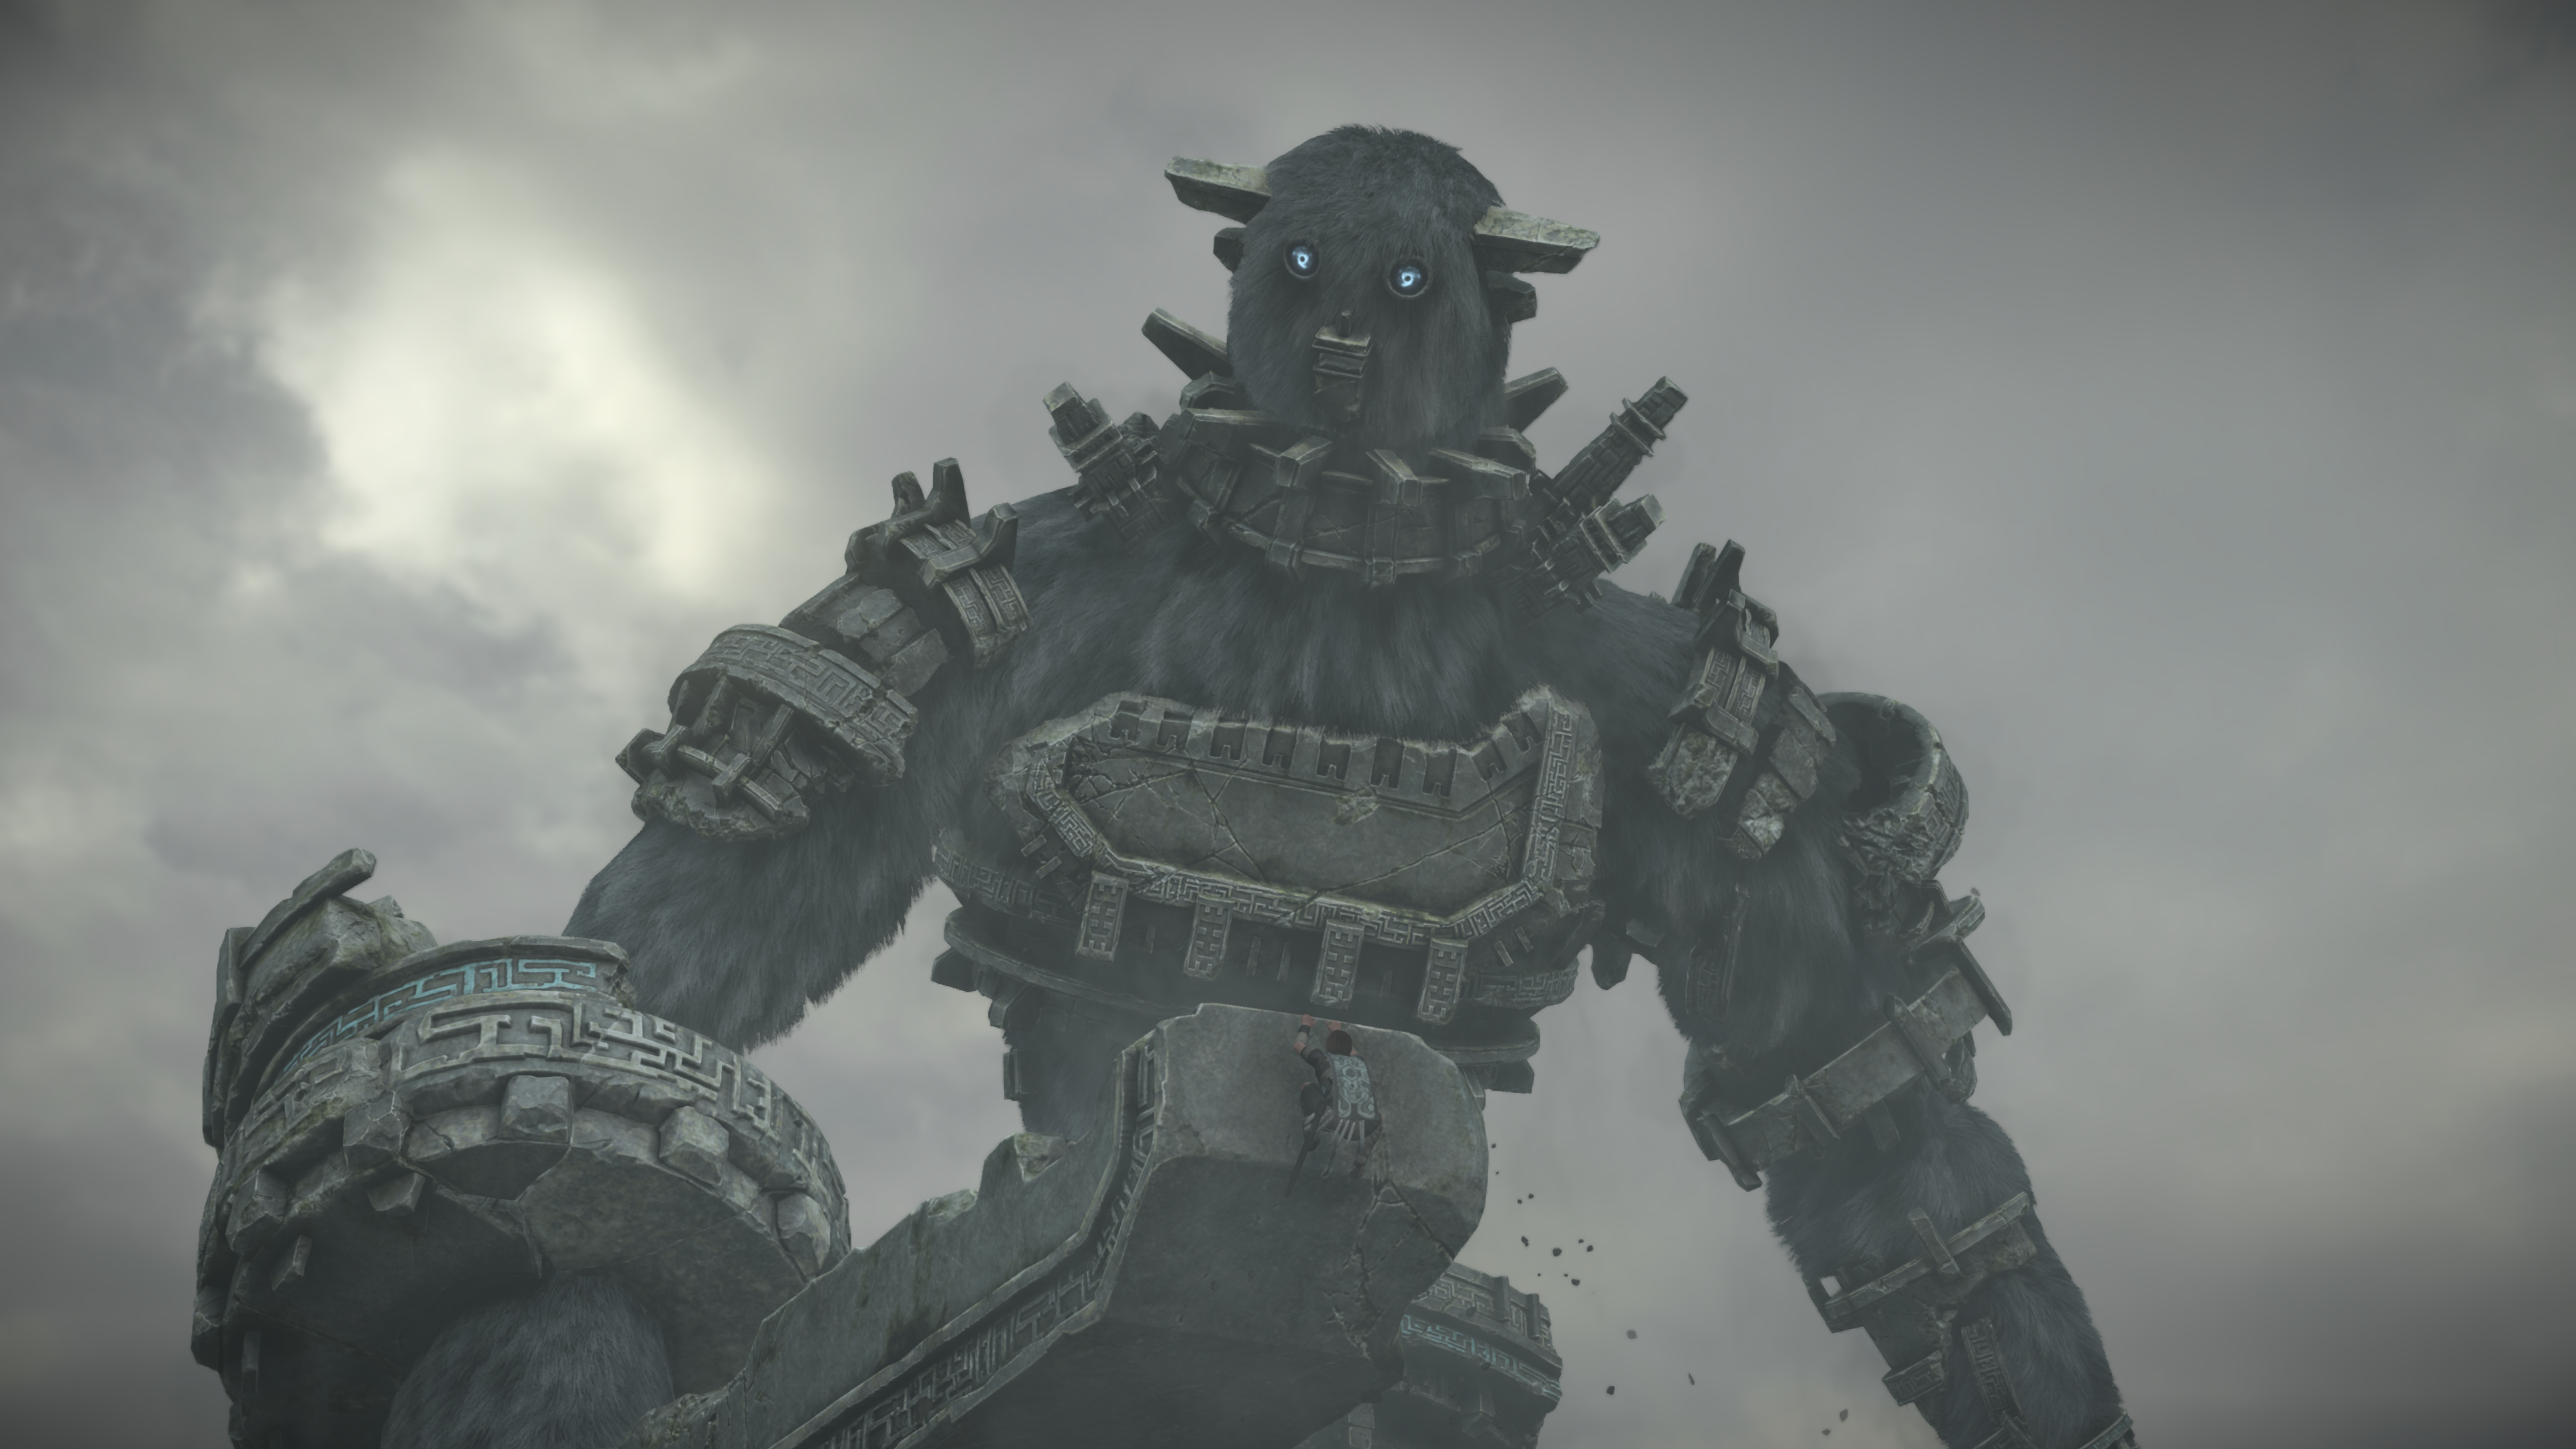 Shadow Of The Colossus PS4 Gameplay Videos Showcase Epic Boss